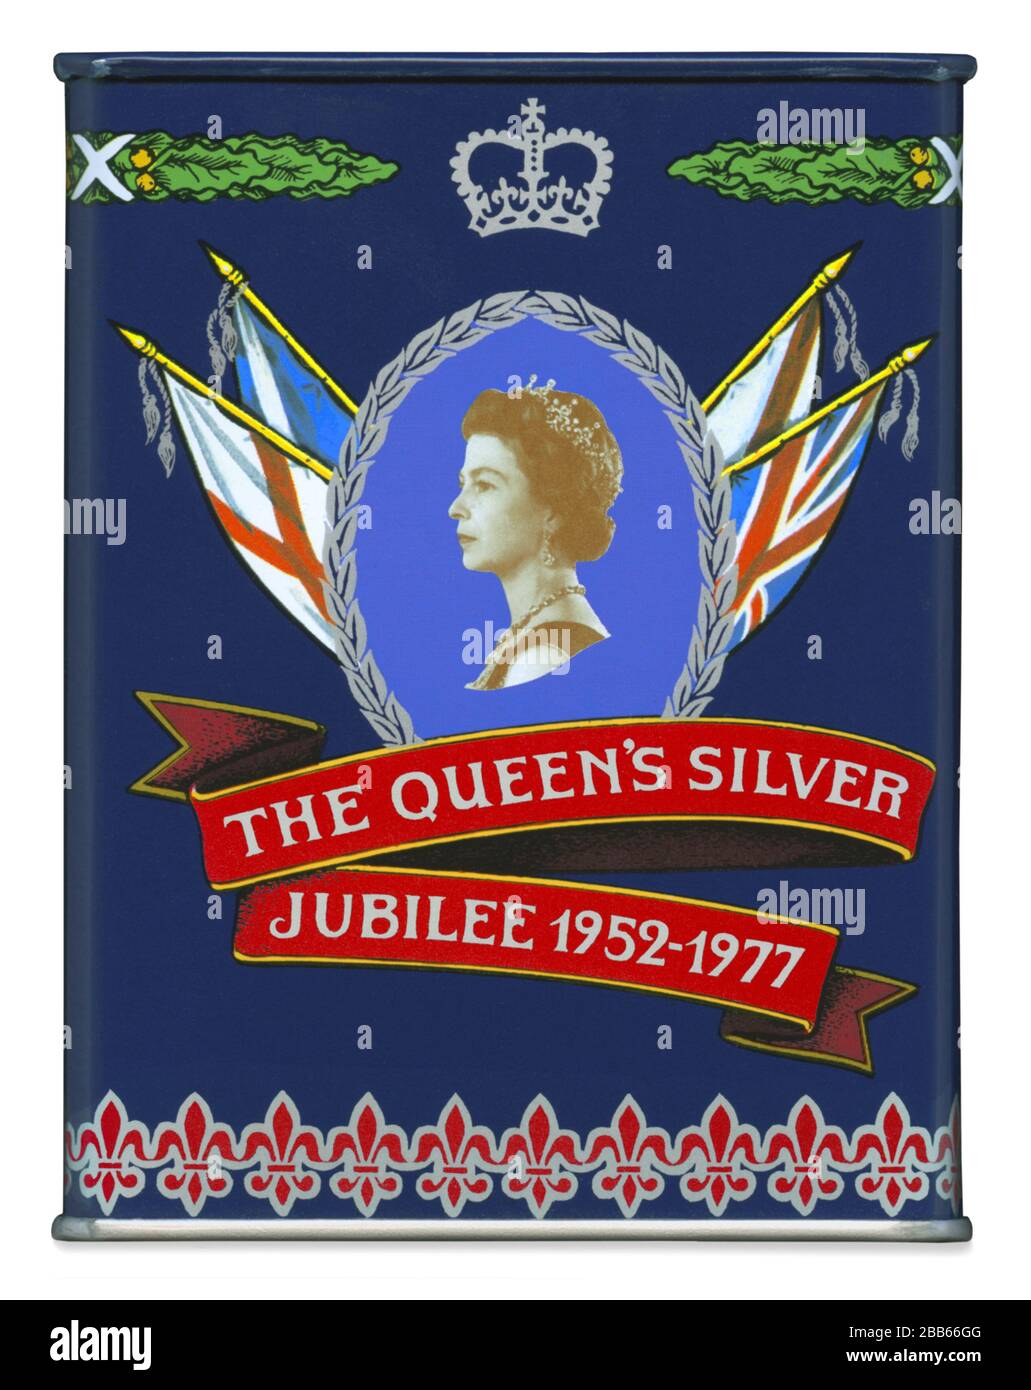 A side view of a commemorative tea caddy or tin produced in 1977 to celebrate the Silver Jubilee of Queen Elizabeth II. Stock Photo